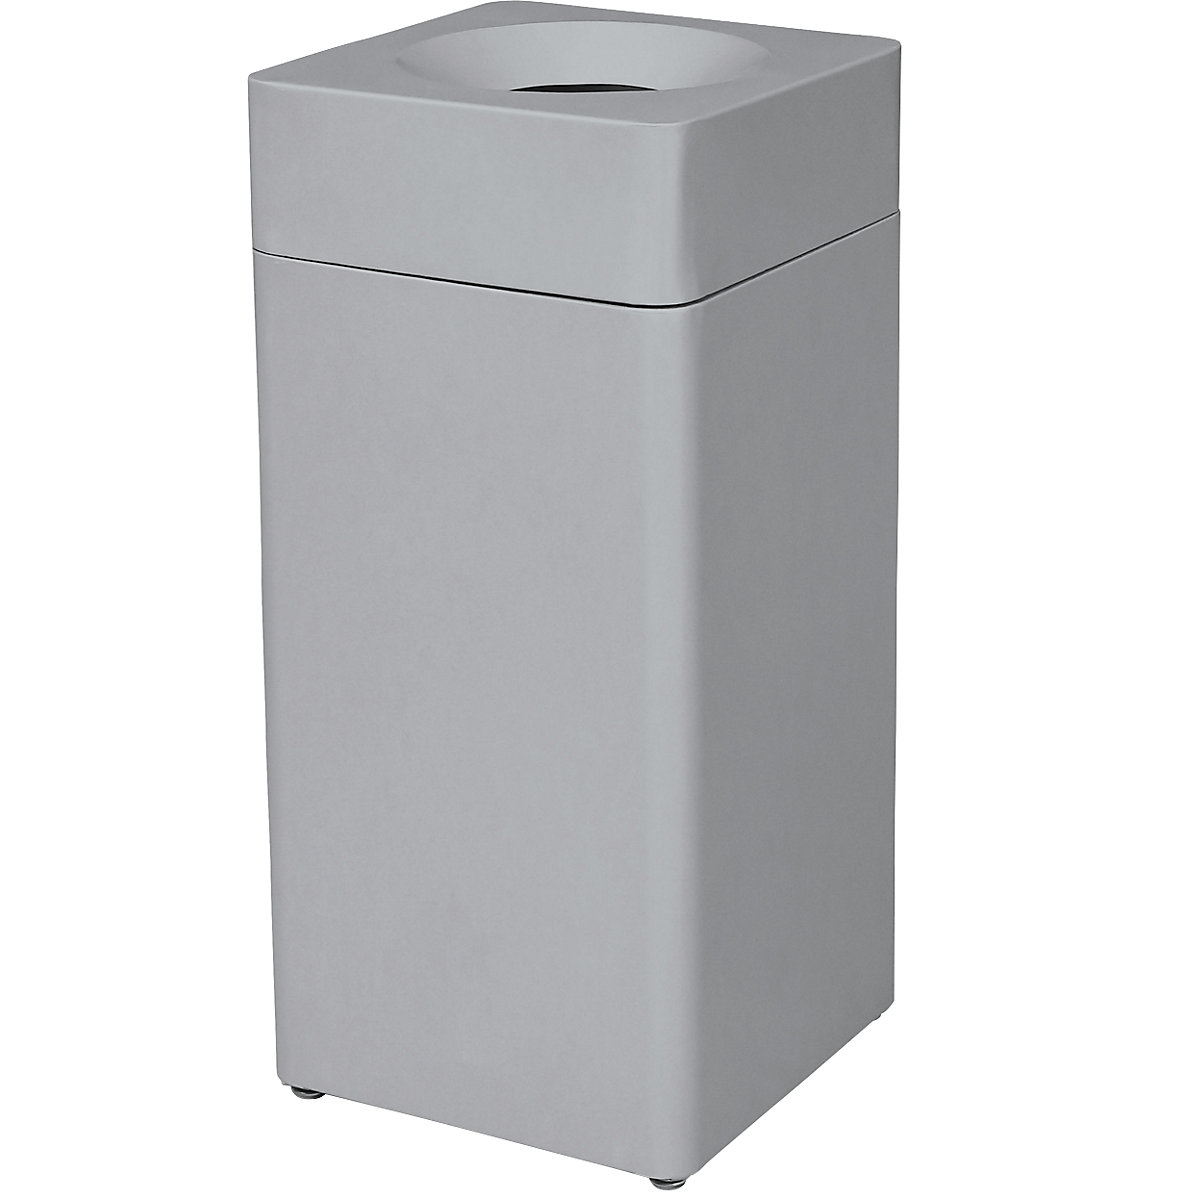 Waste collector, square, capacity 42 l, WxHxD 350 x 760 x 350 mm, silver grey-5